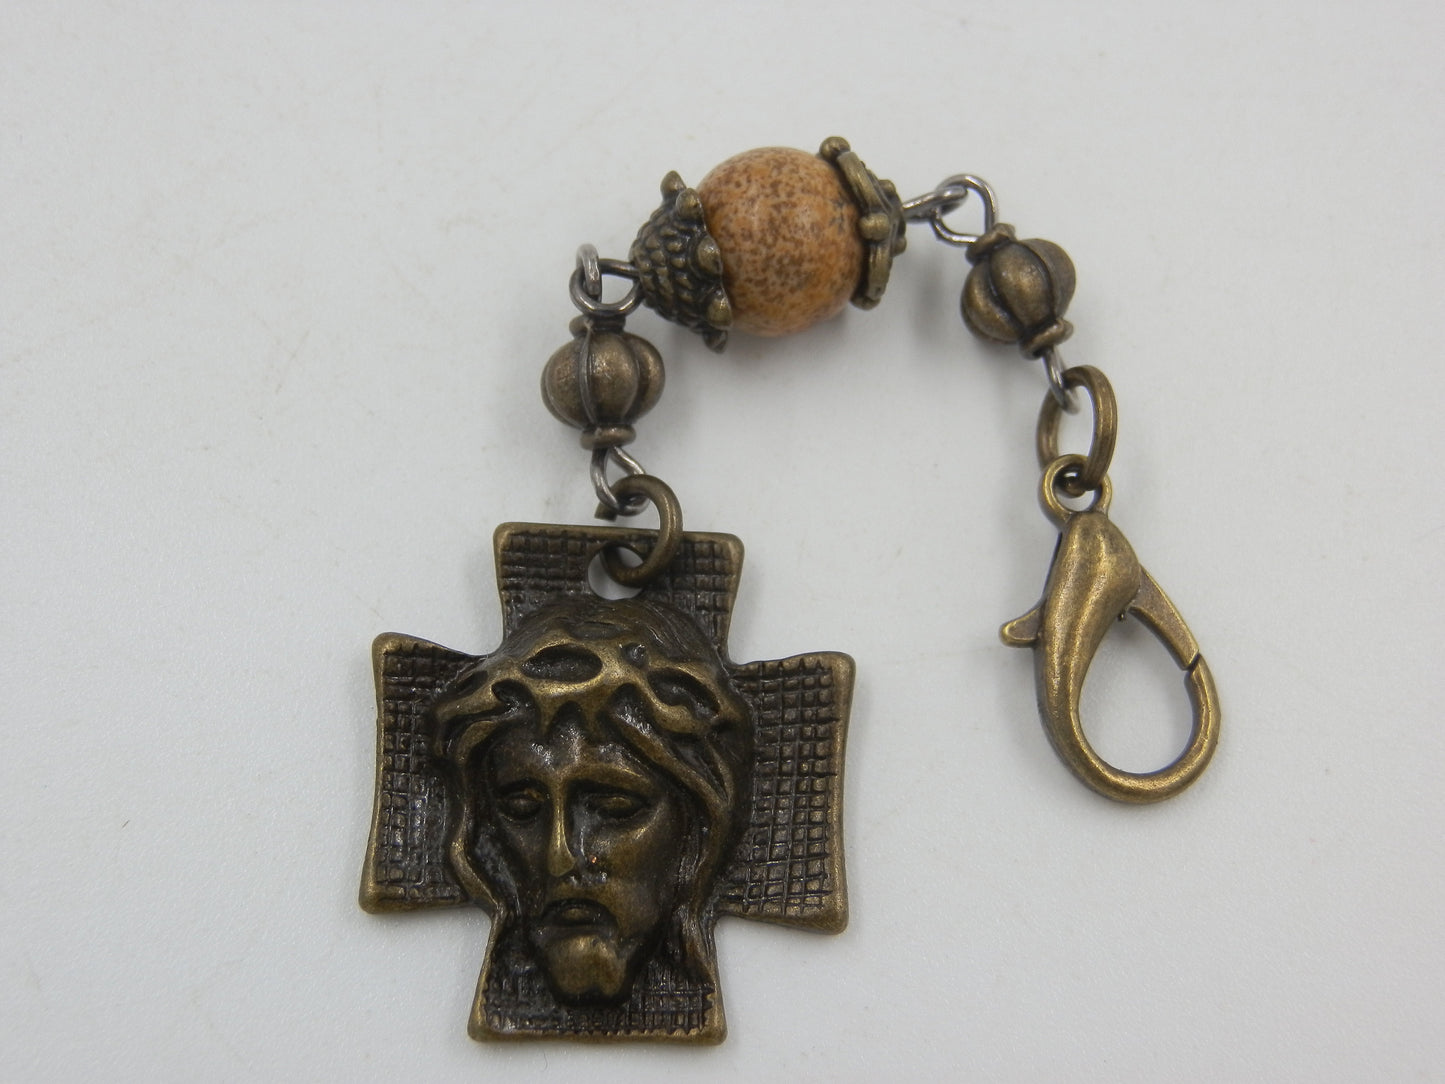 Crown of Thorns prayer beads, The Passion of Christ keychain,  Religious Medal, Religious Purse clip, Religious gift, Travel Cross.